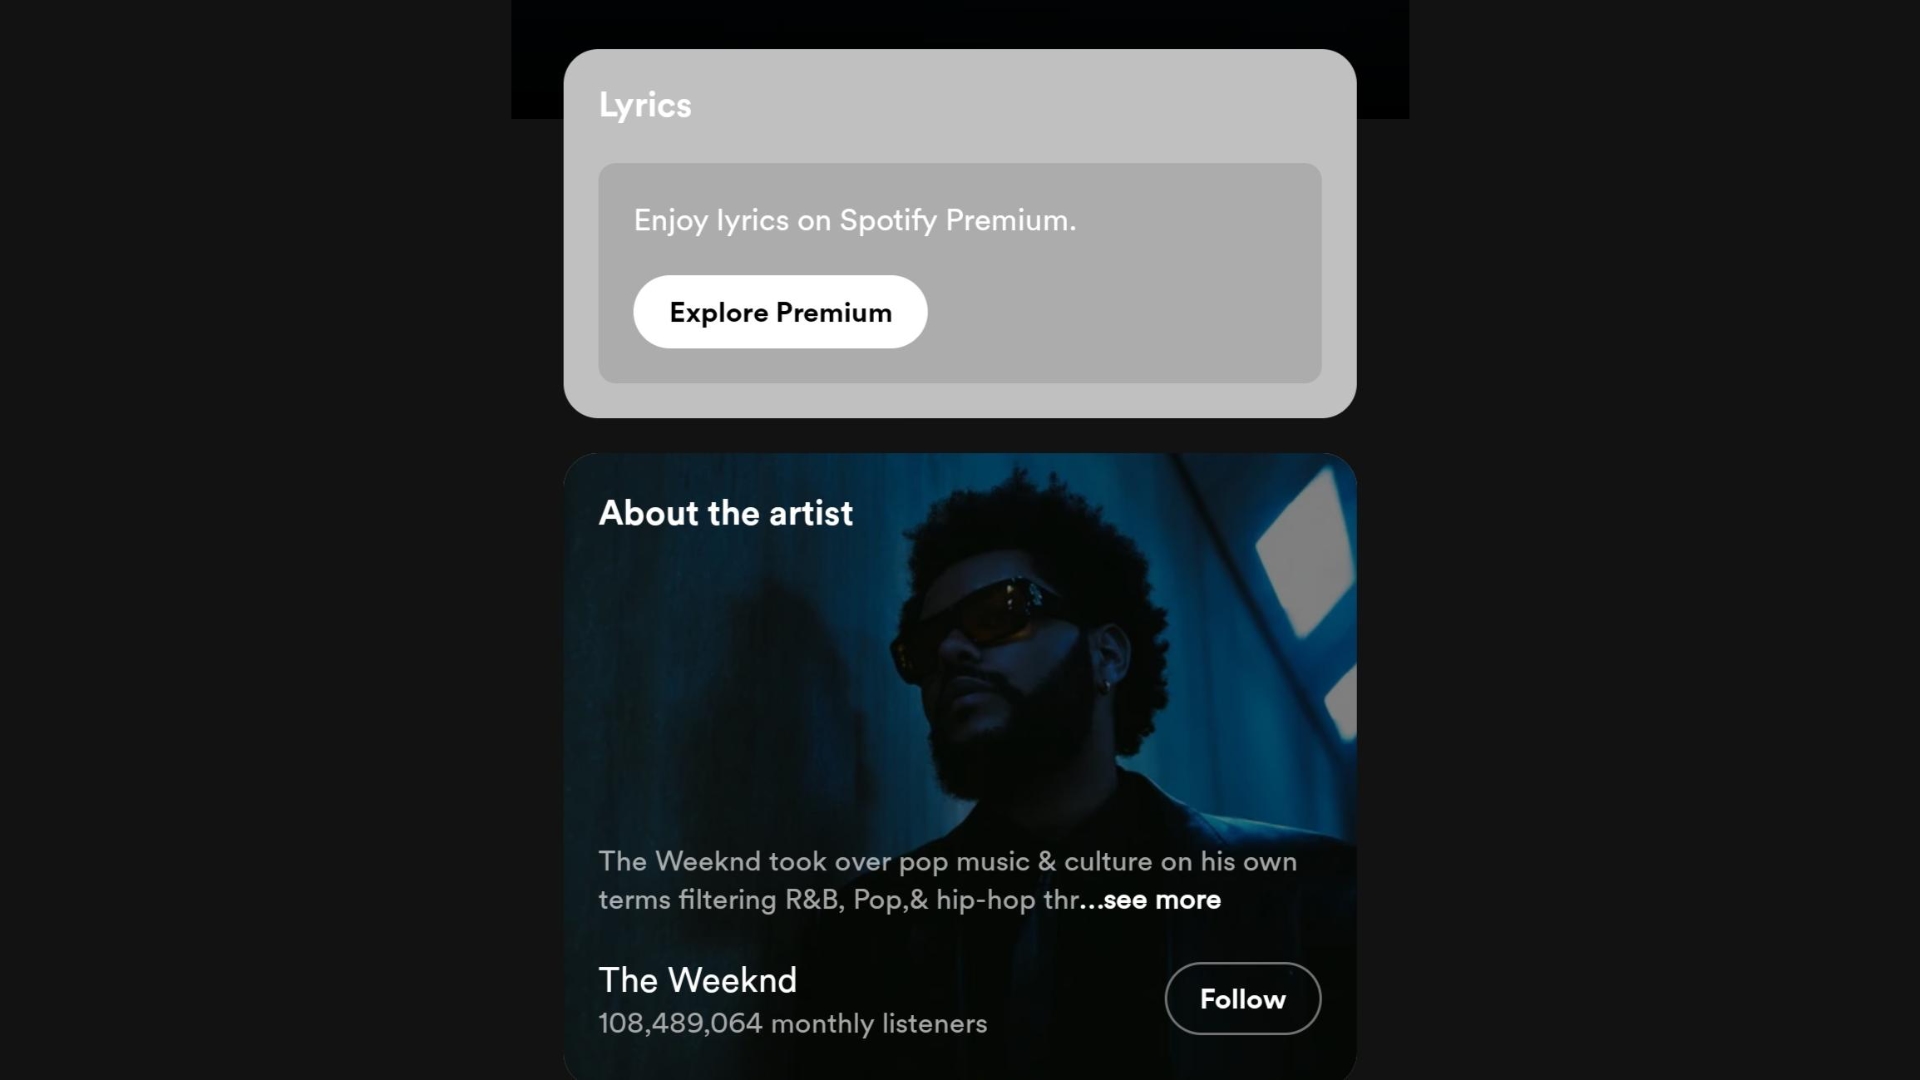 Spotify message about a Premium subscription required to view song lyrics